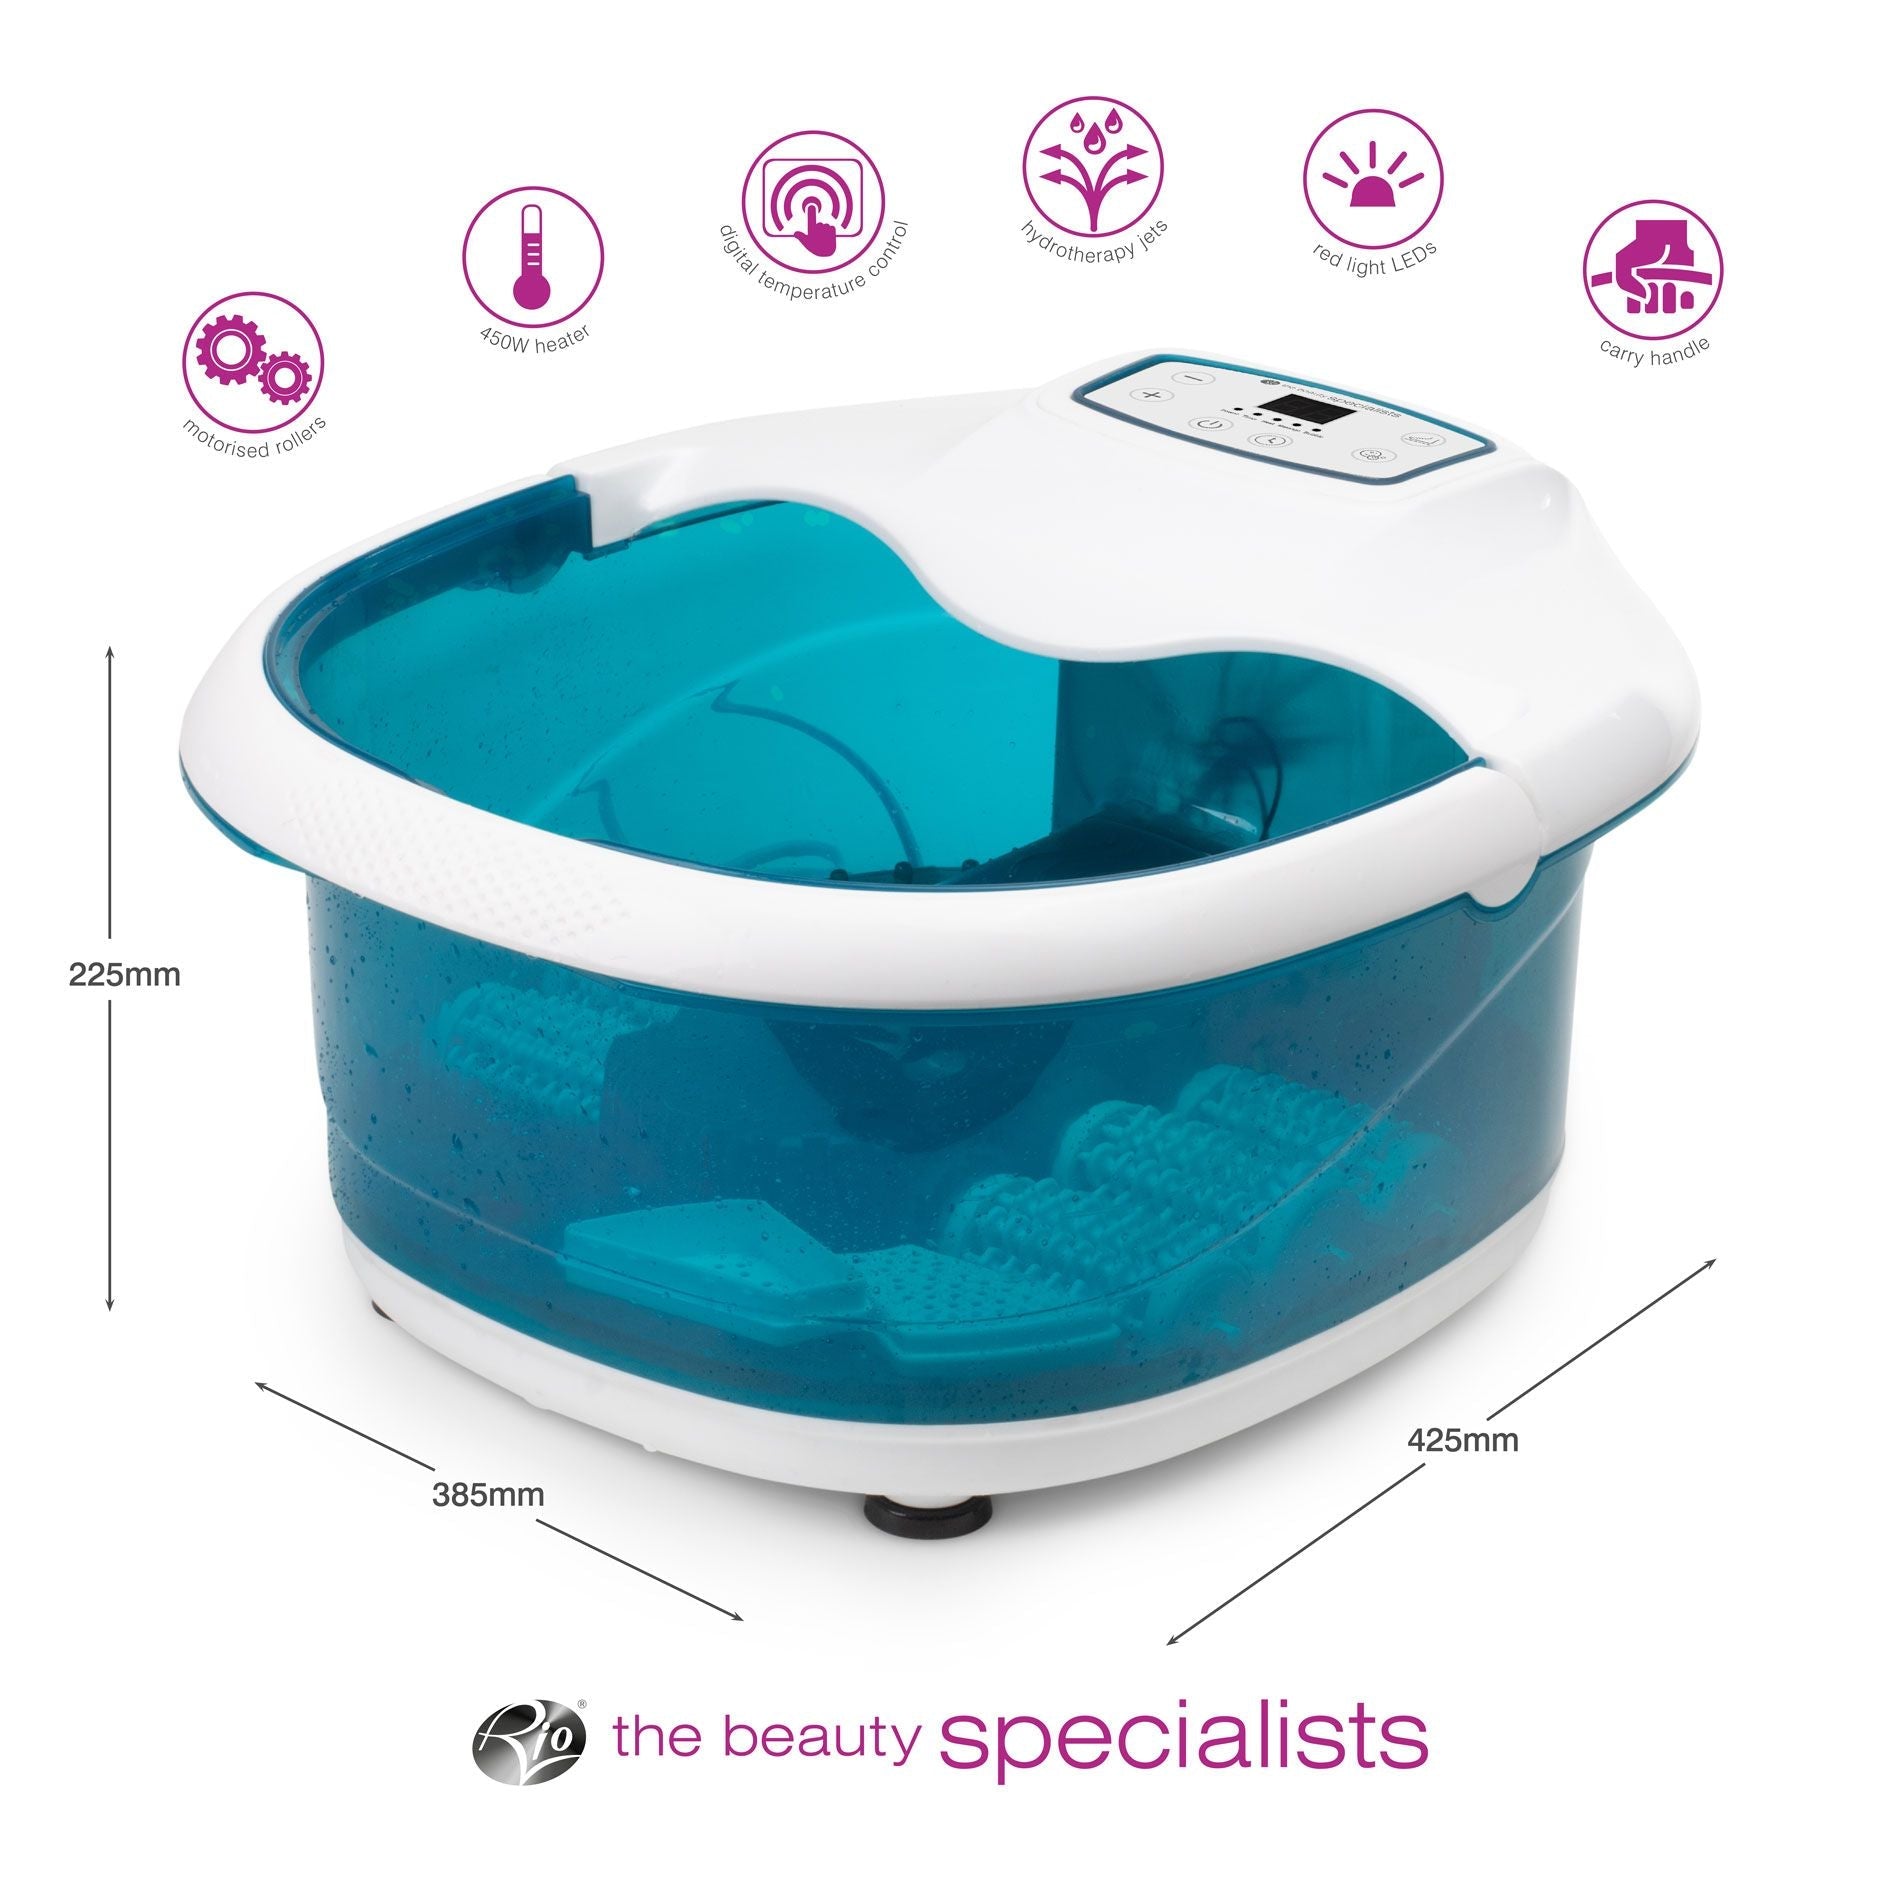 motorised roller foot spa bath with arrows labelling height 225mm, width 385mm and depth 425mm